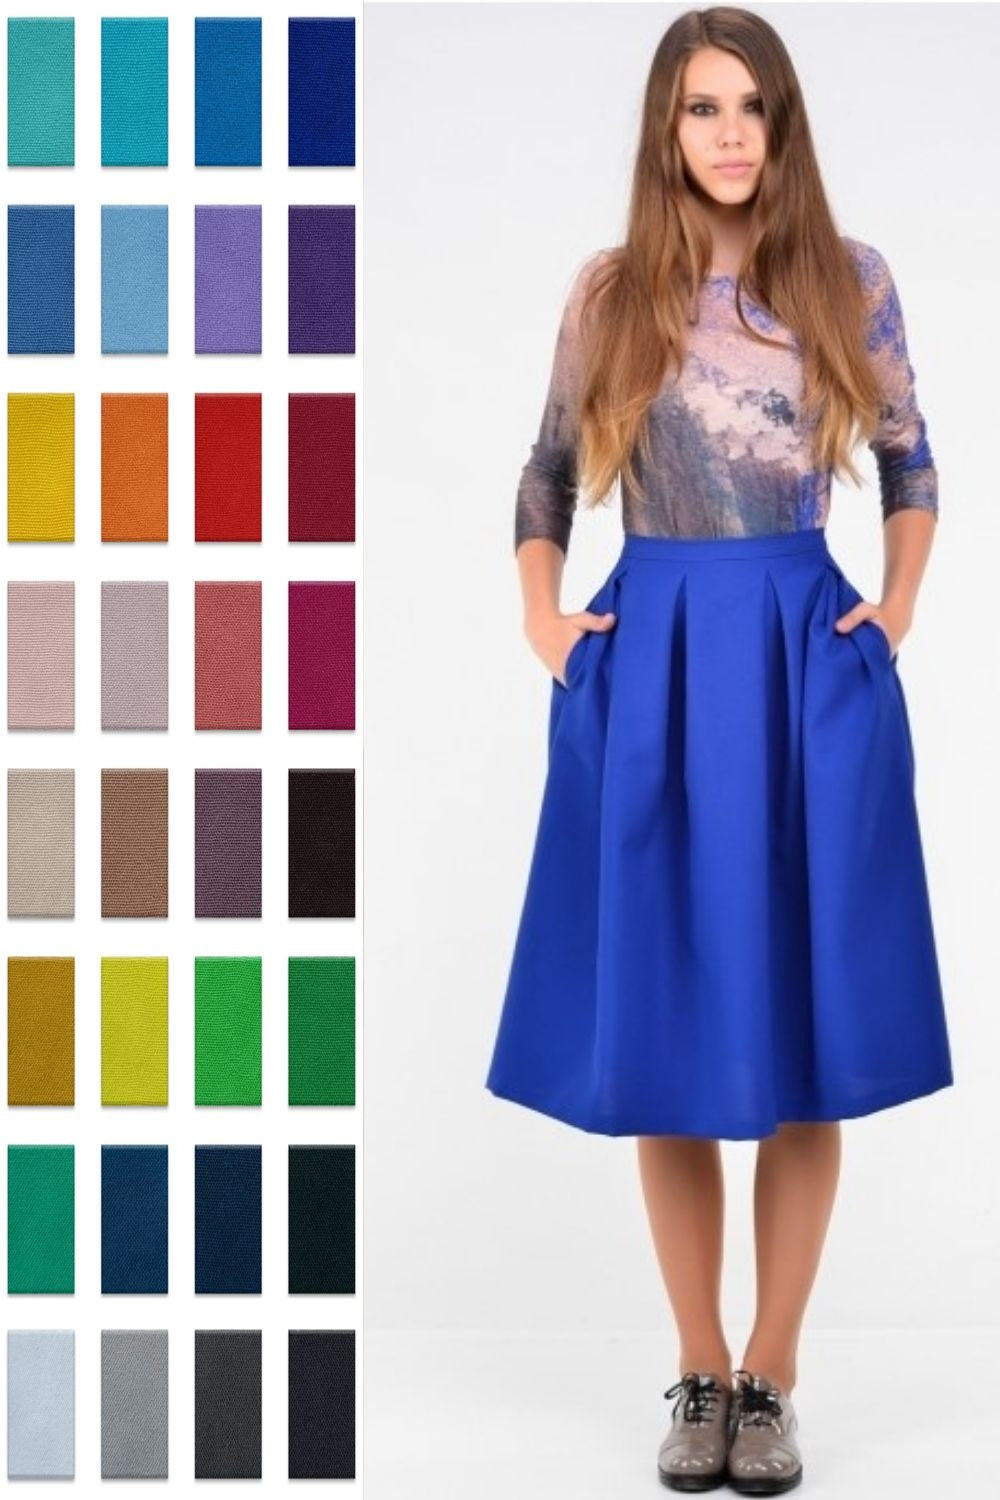 Pleated midi skirts with pockets in many colors